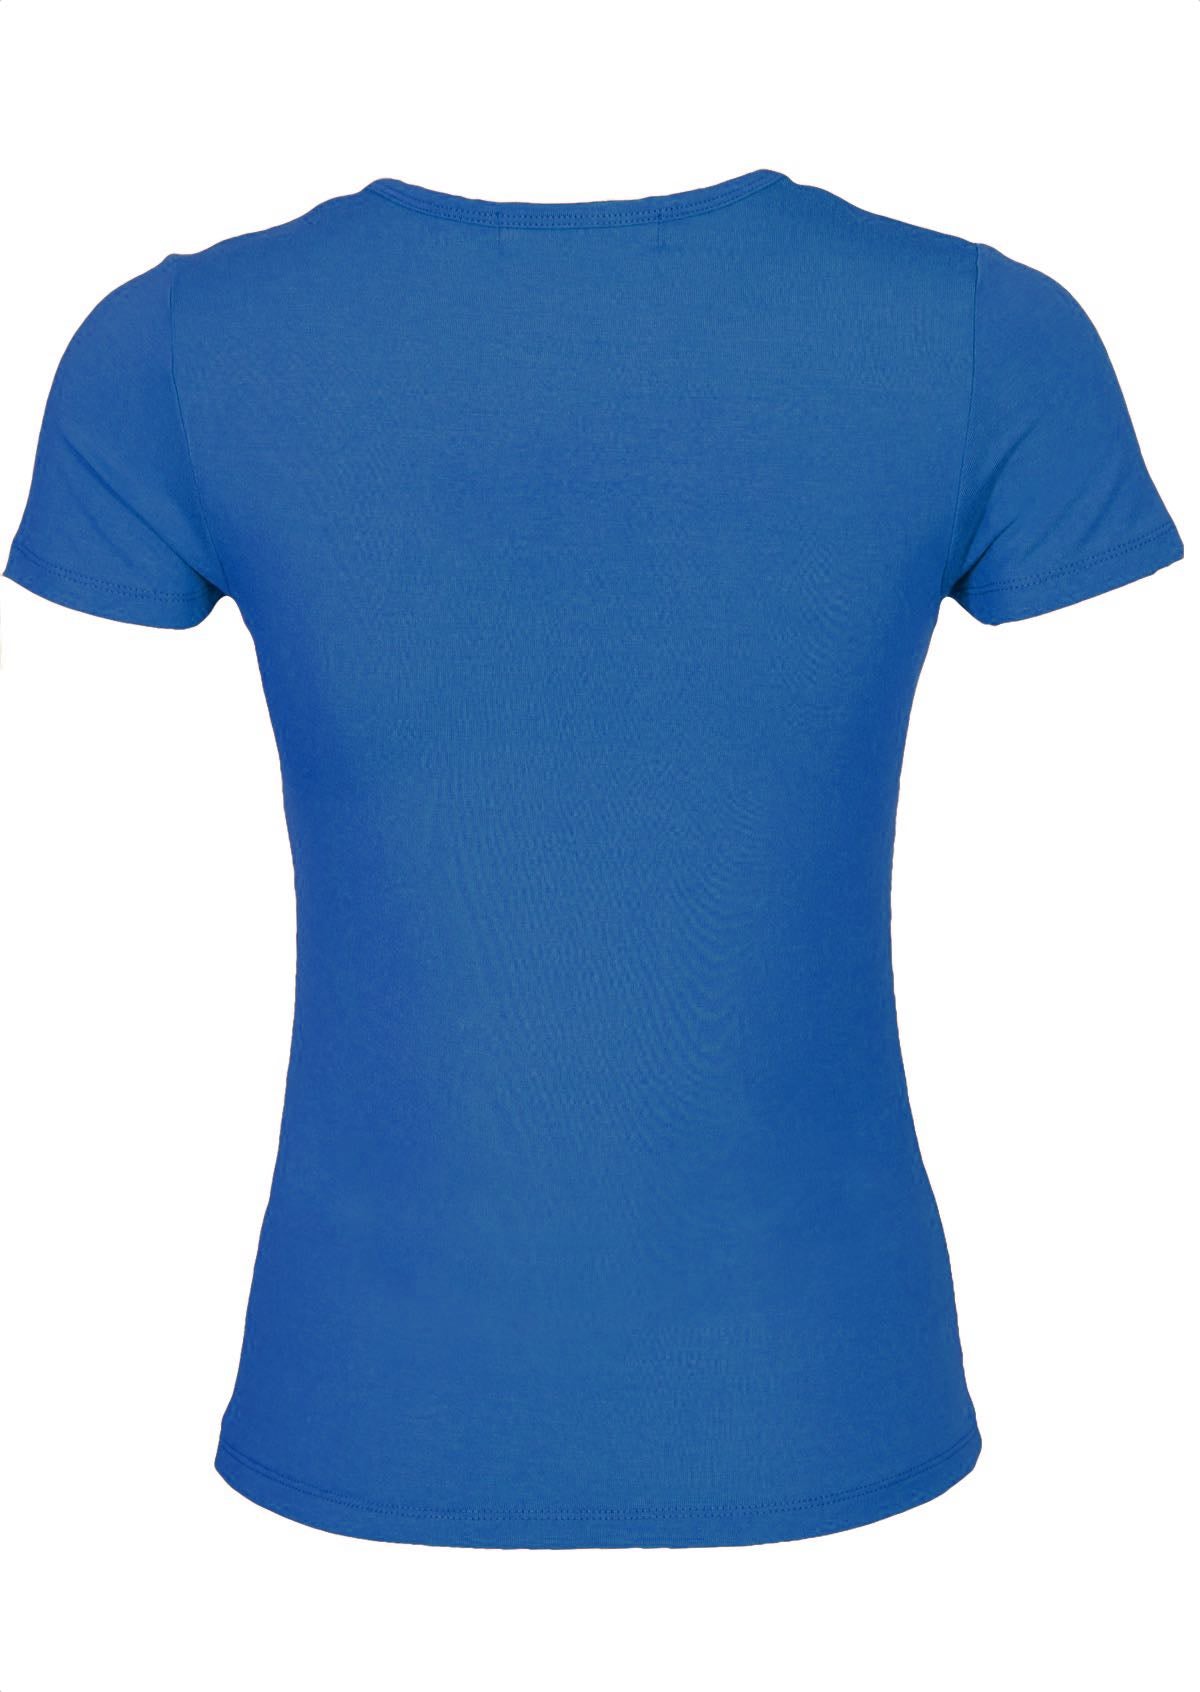 Back view fitted women's blue rayon short sleeve top.